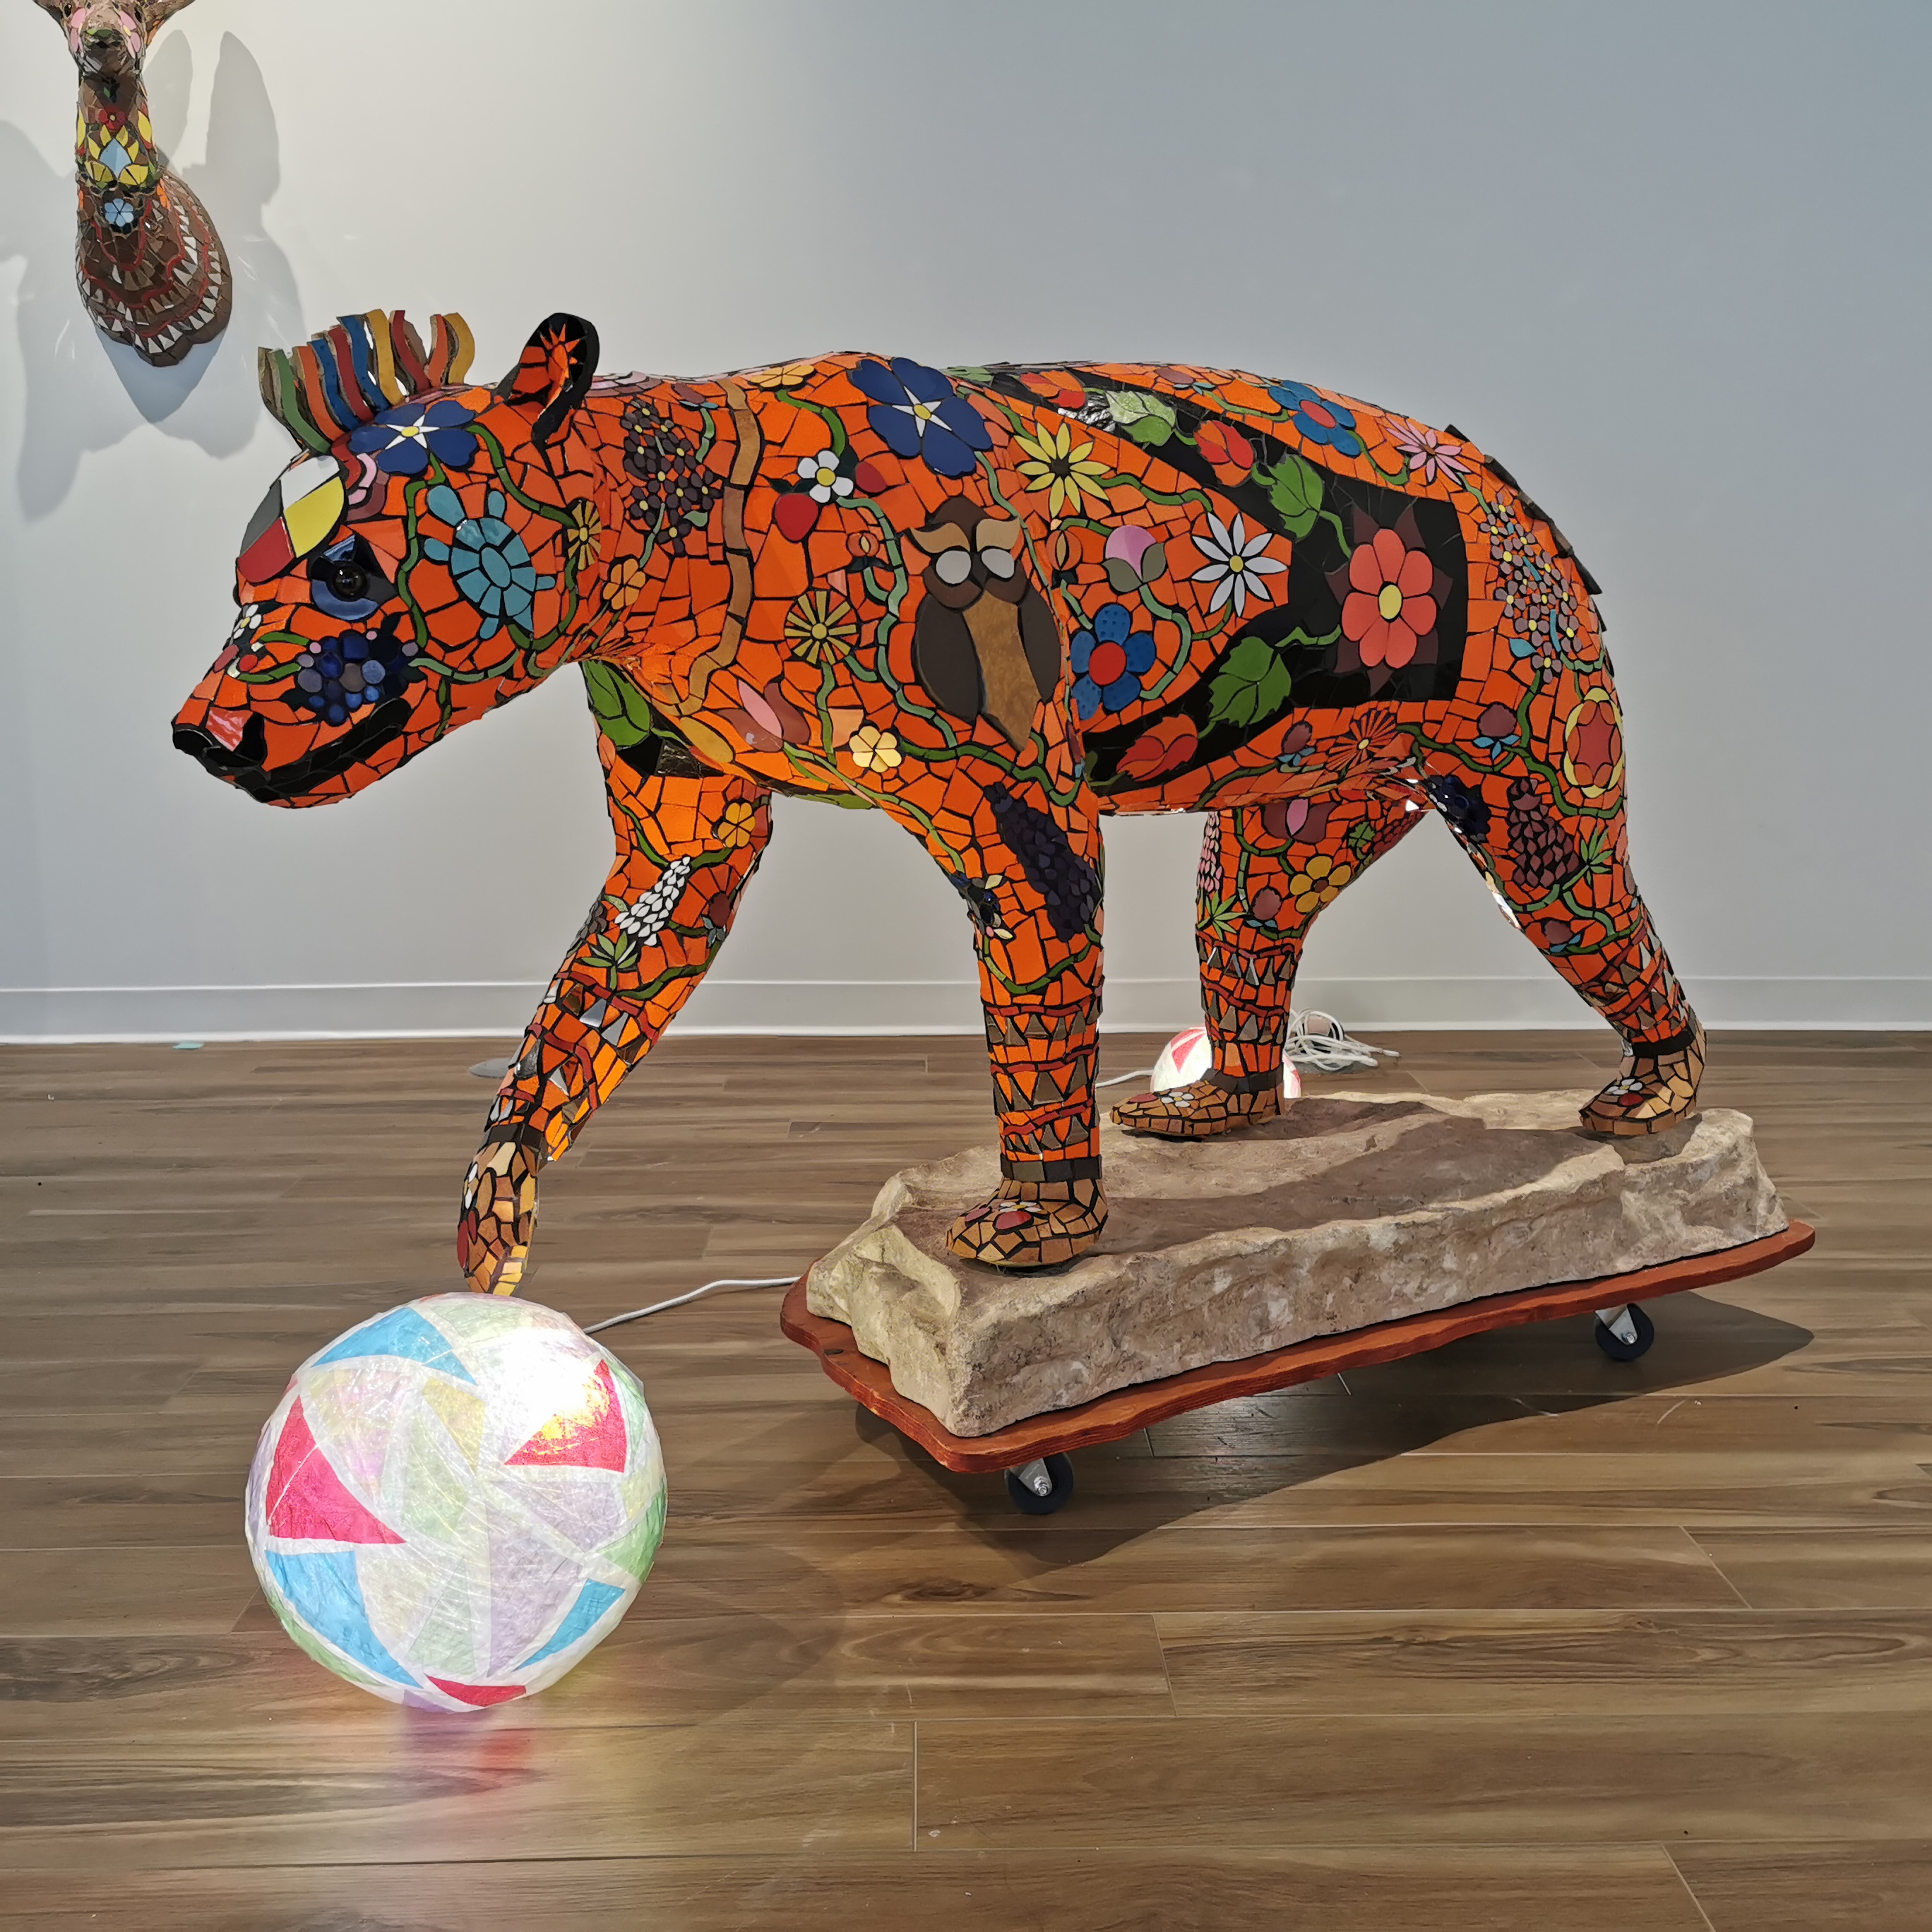 A bear form covered in colourful mosaic tile pieces in an art gallery